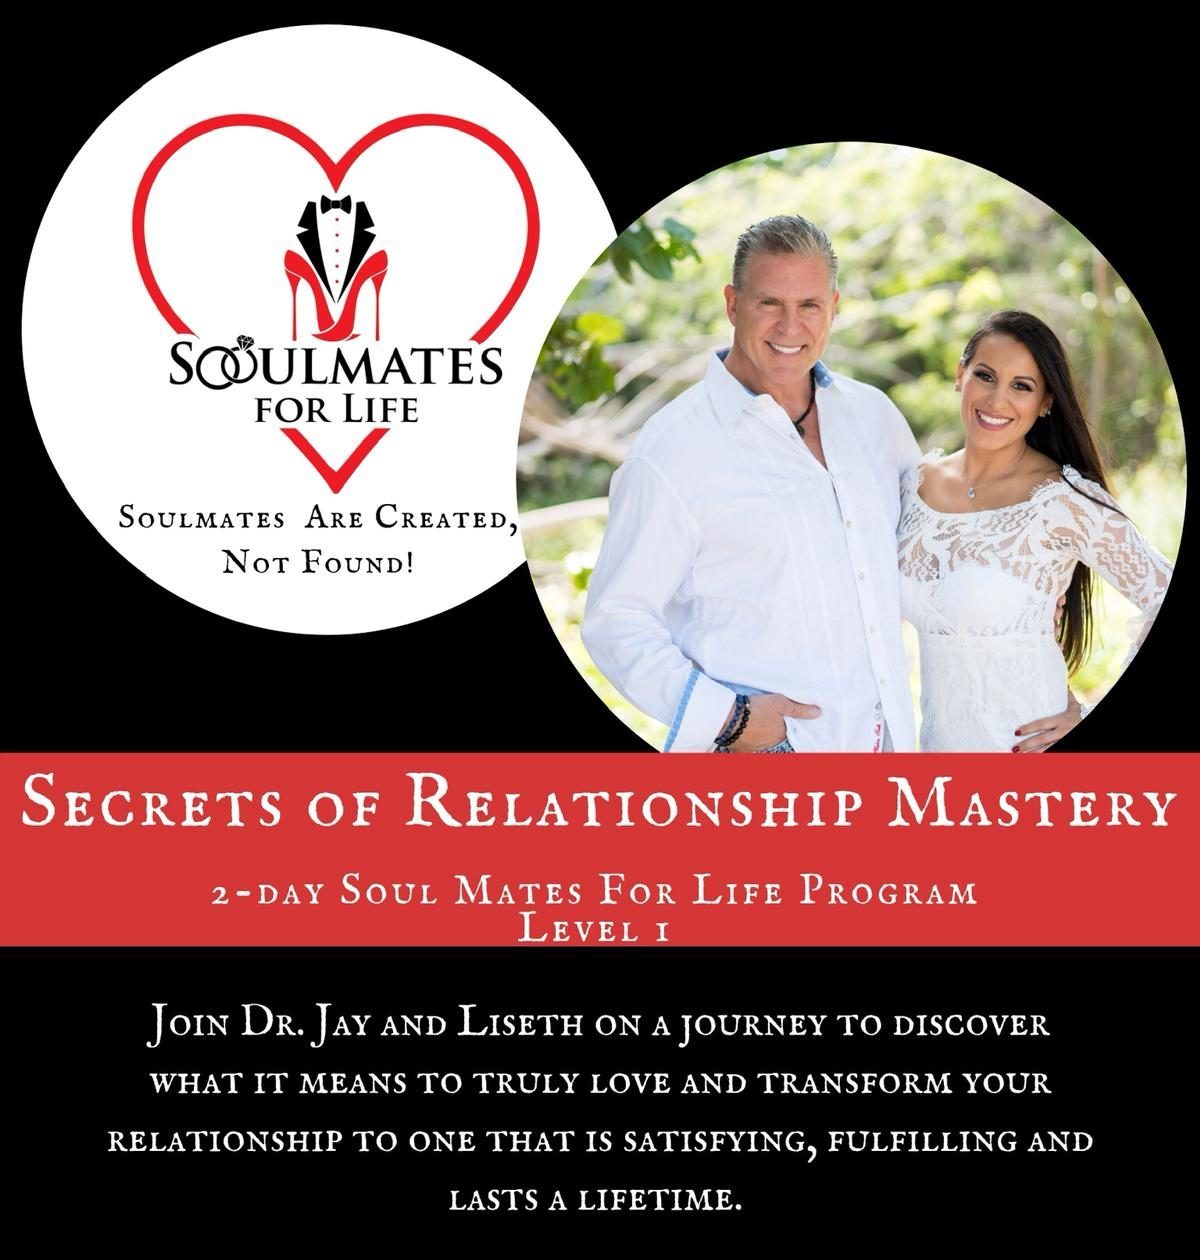 Relarionship Mastery